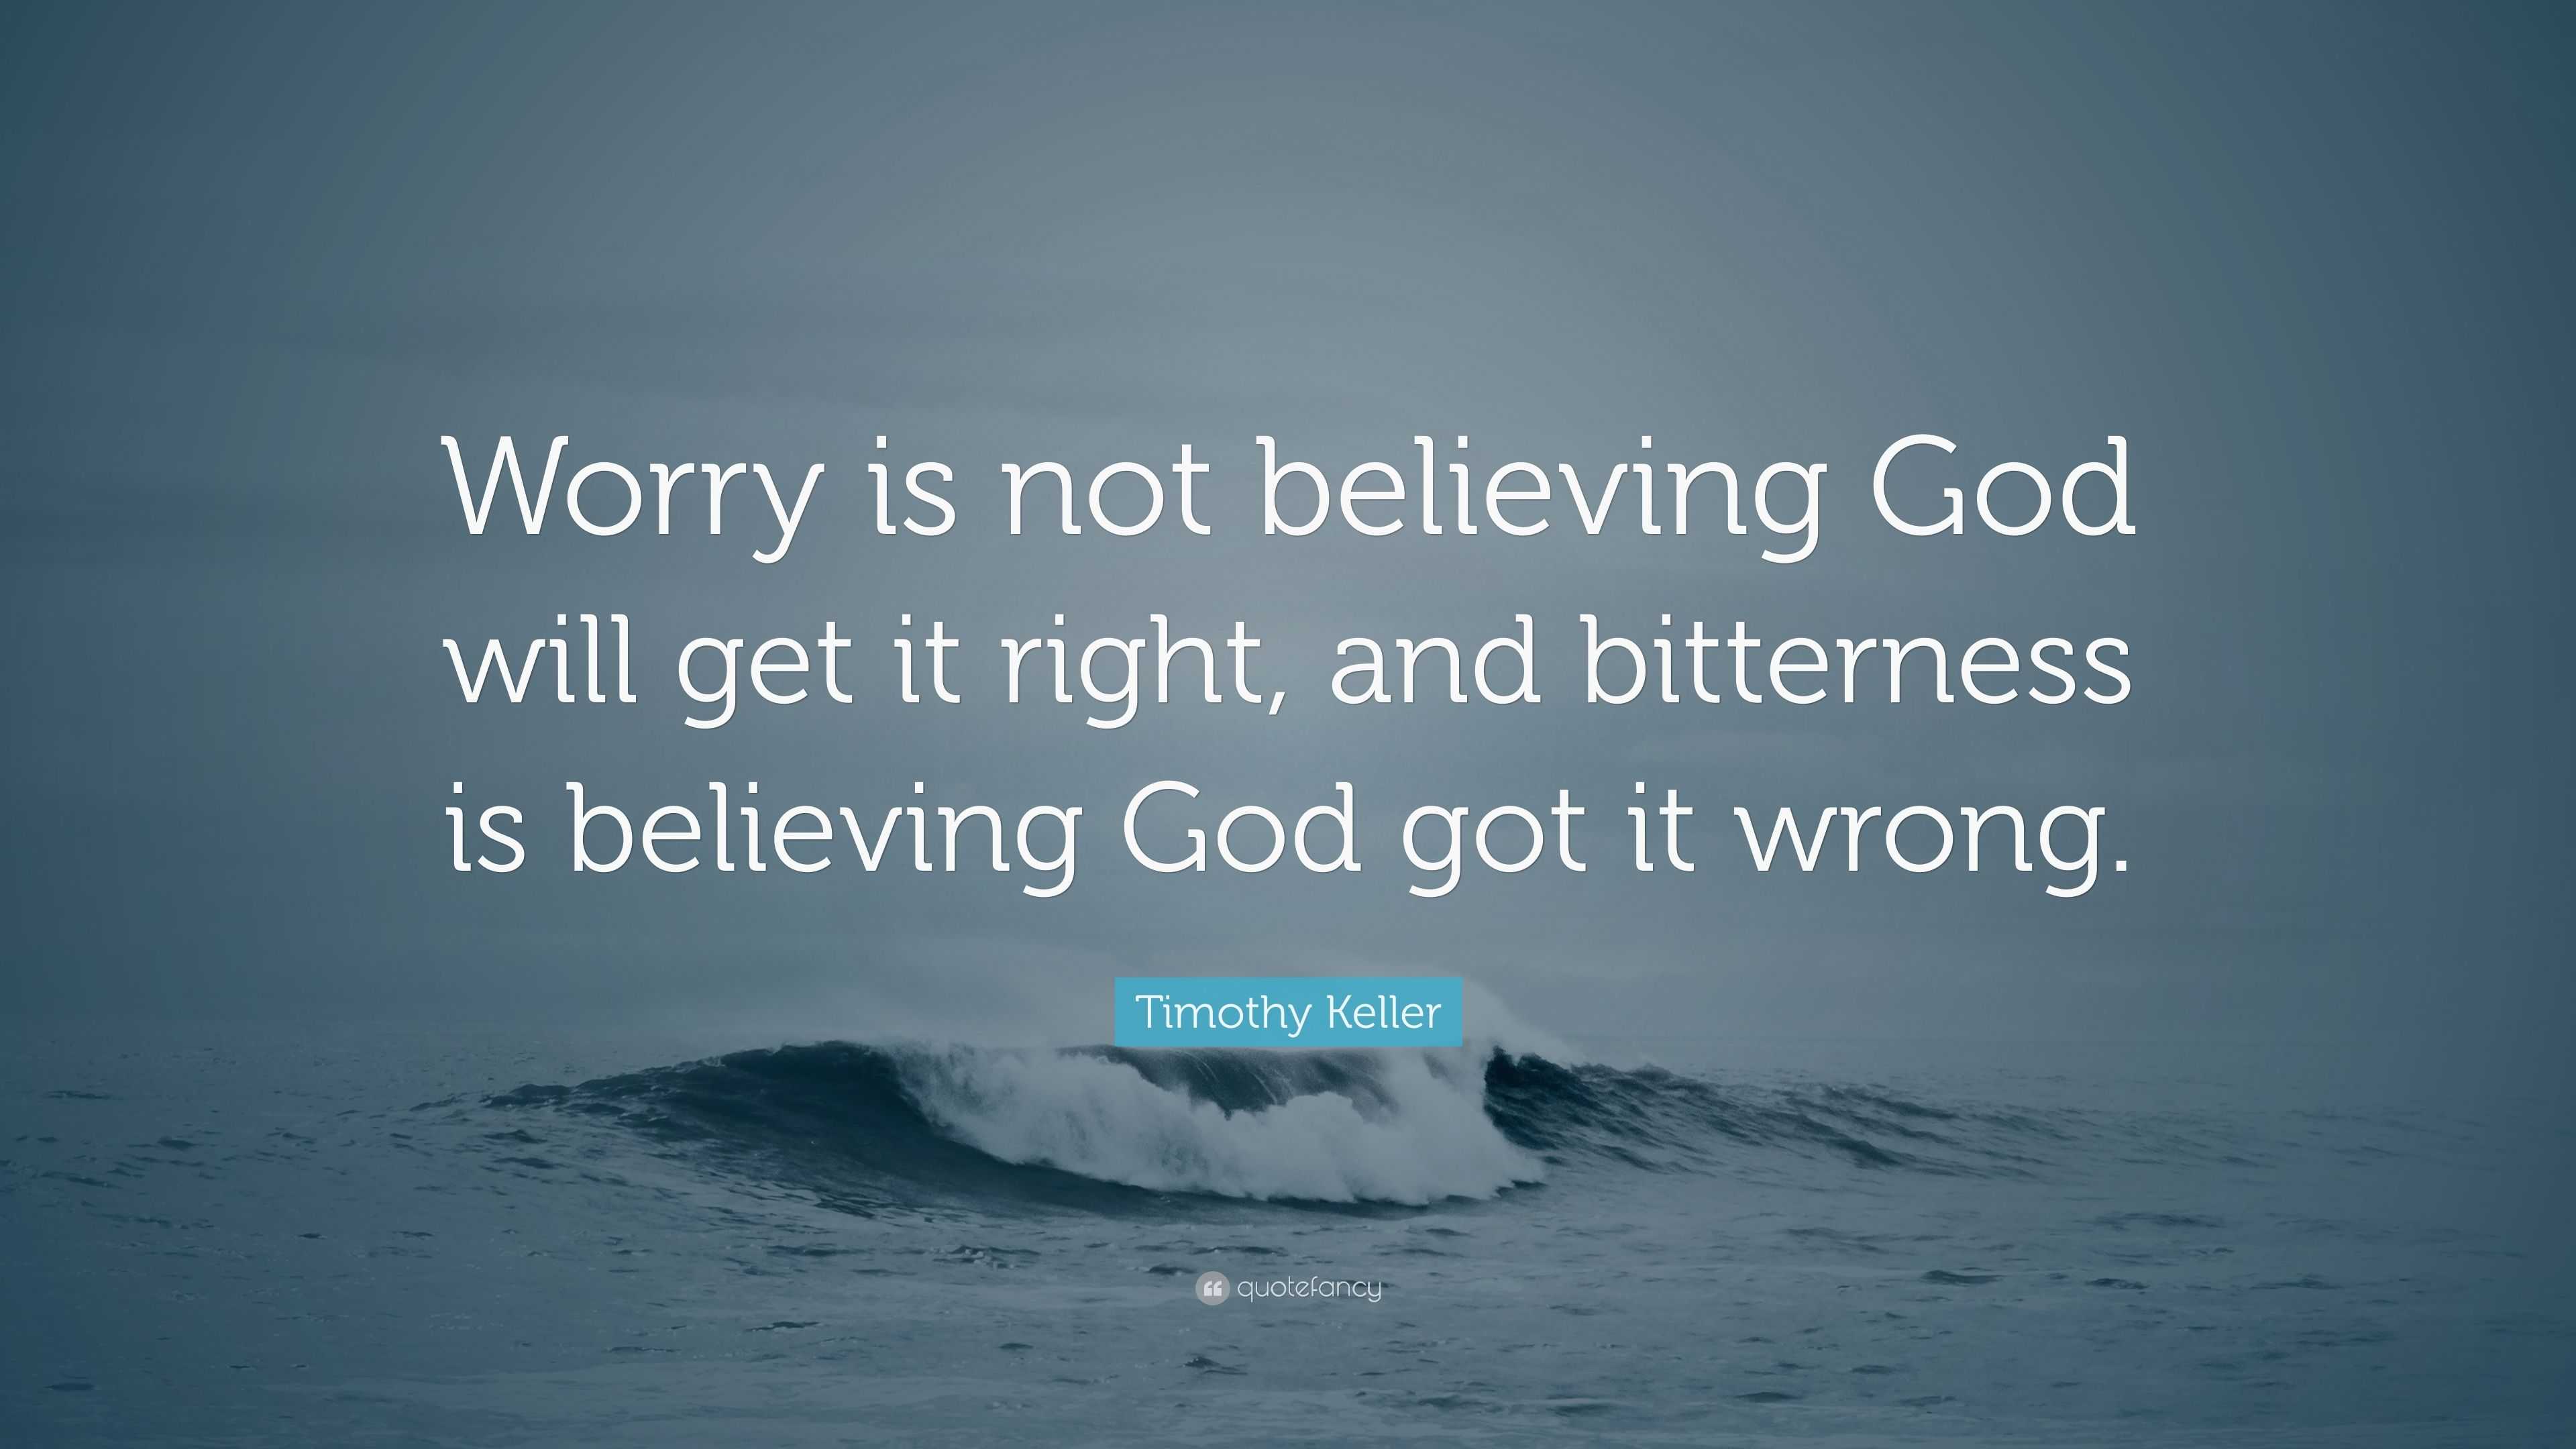 worry is not believing god will get it right, and bitterness is